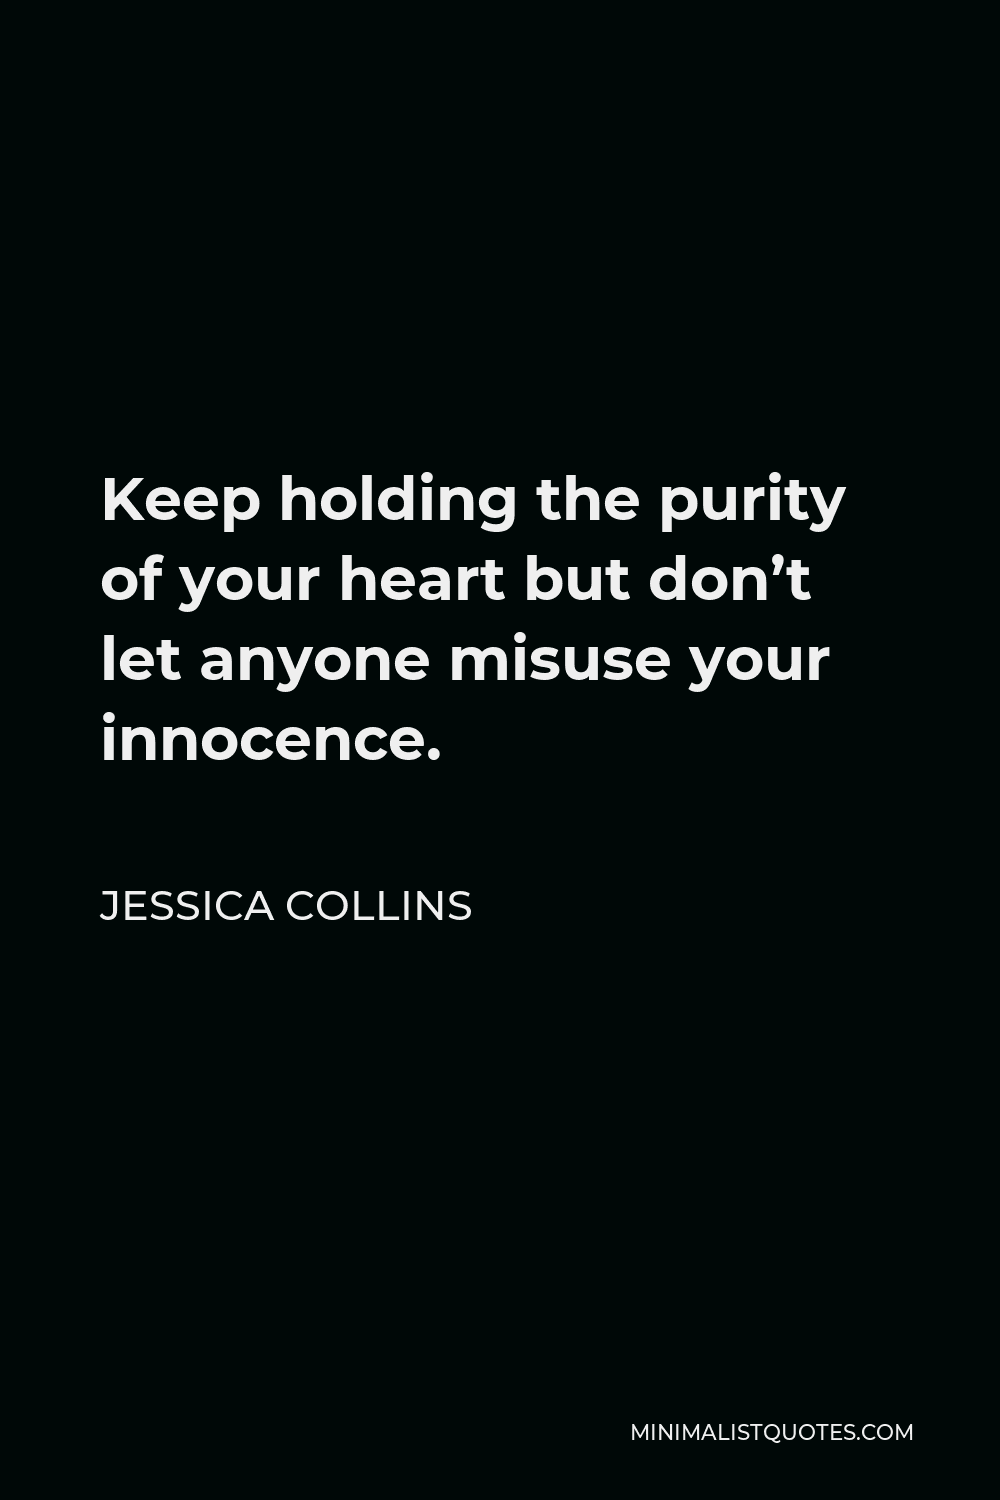 Jessica Collins Quote - Keep holding the purity of your heart but don’t let anyone misuse your innocence.